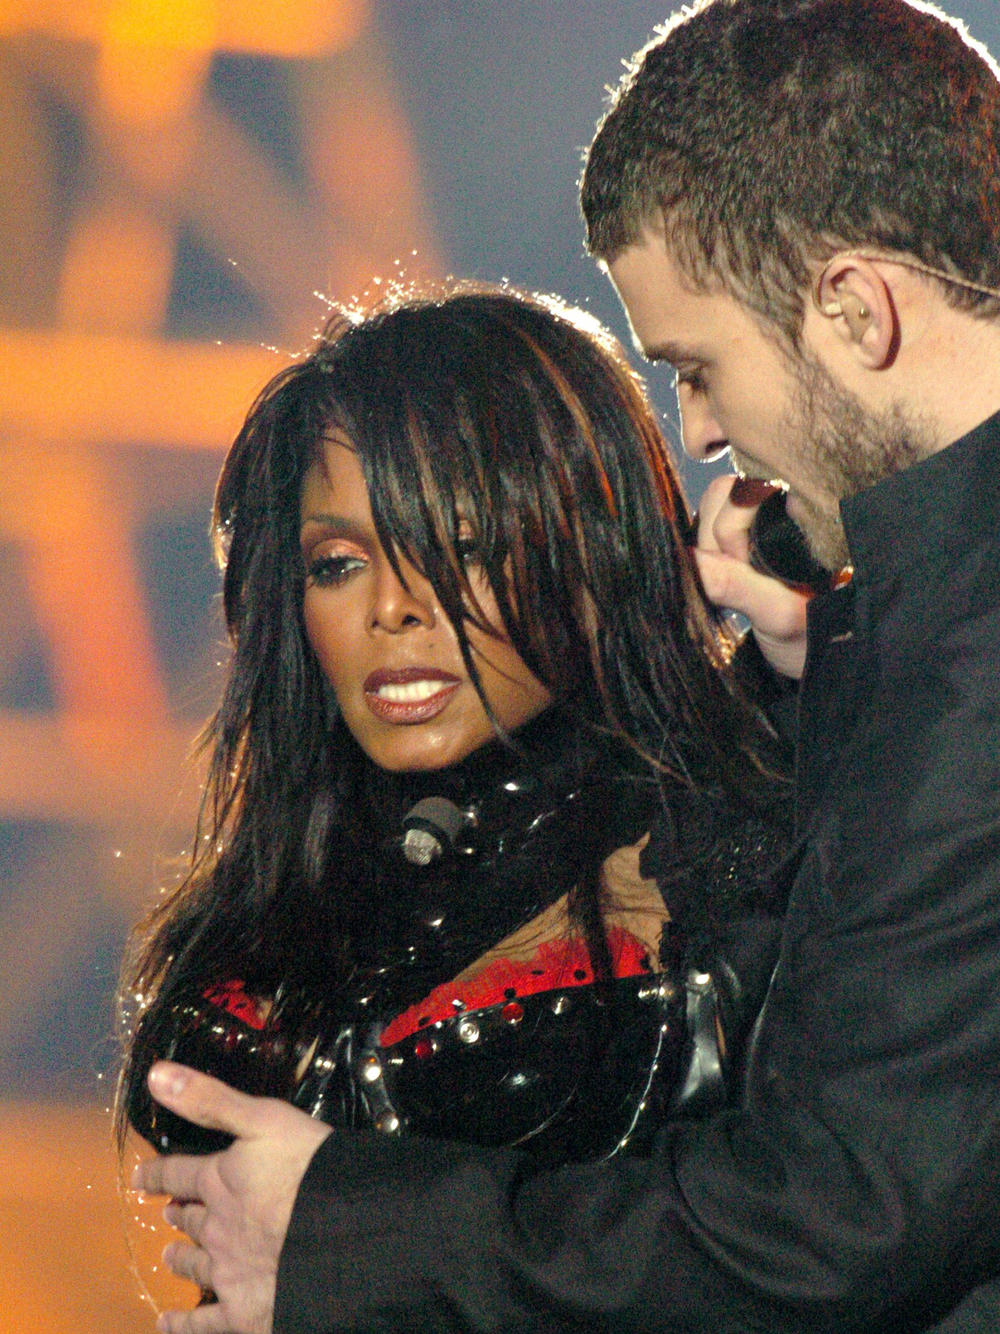 Justin Timberlake helps Janet Jackson cover her chest after it was exposed during her halftime performance at Super Bowl XXXVIII in 2004